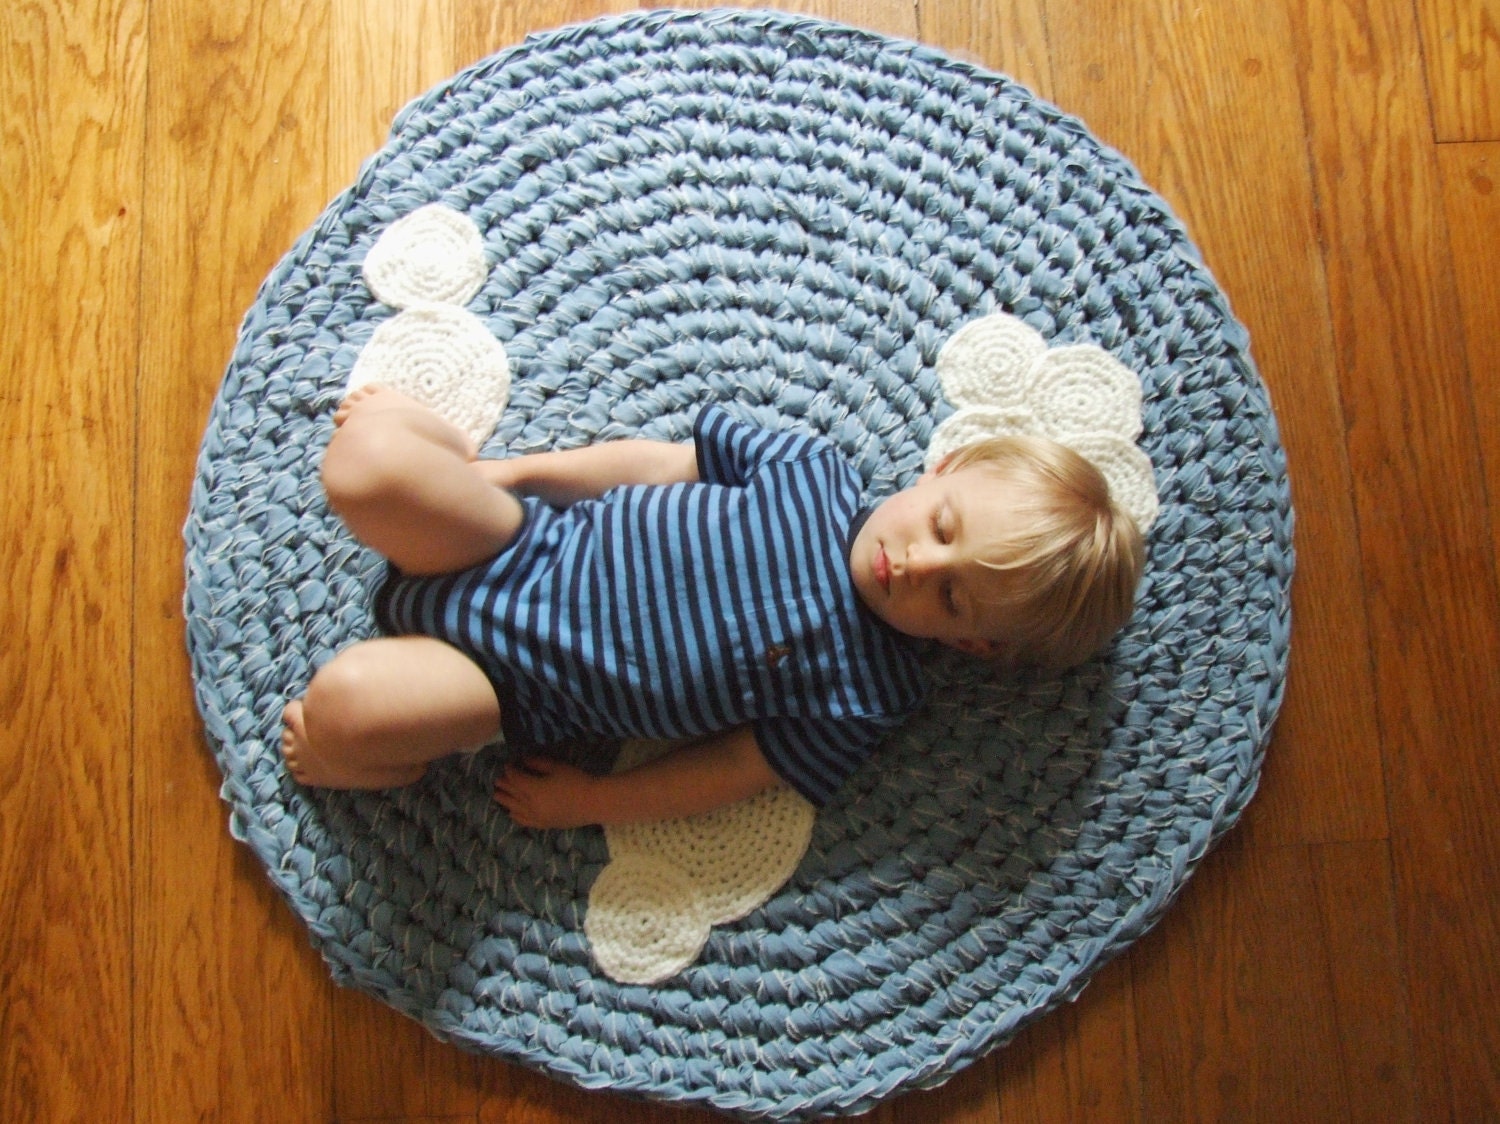 Crochet Rug Upcycled Cotton with Crochet Clouds SALE Blue and White Circle Round Nursery Rug as Featured in Etsy Finds